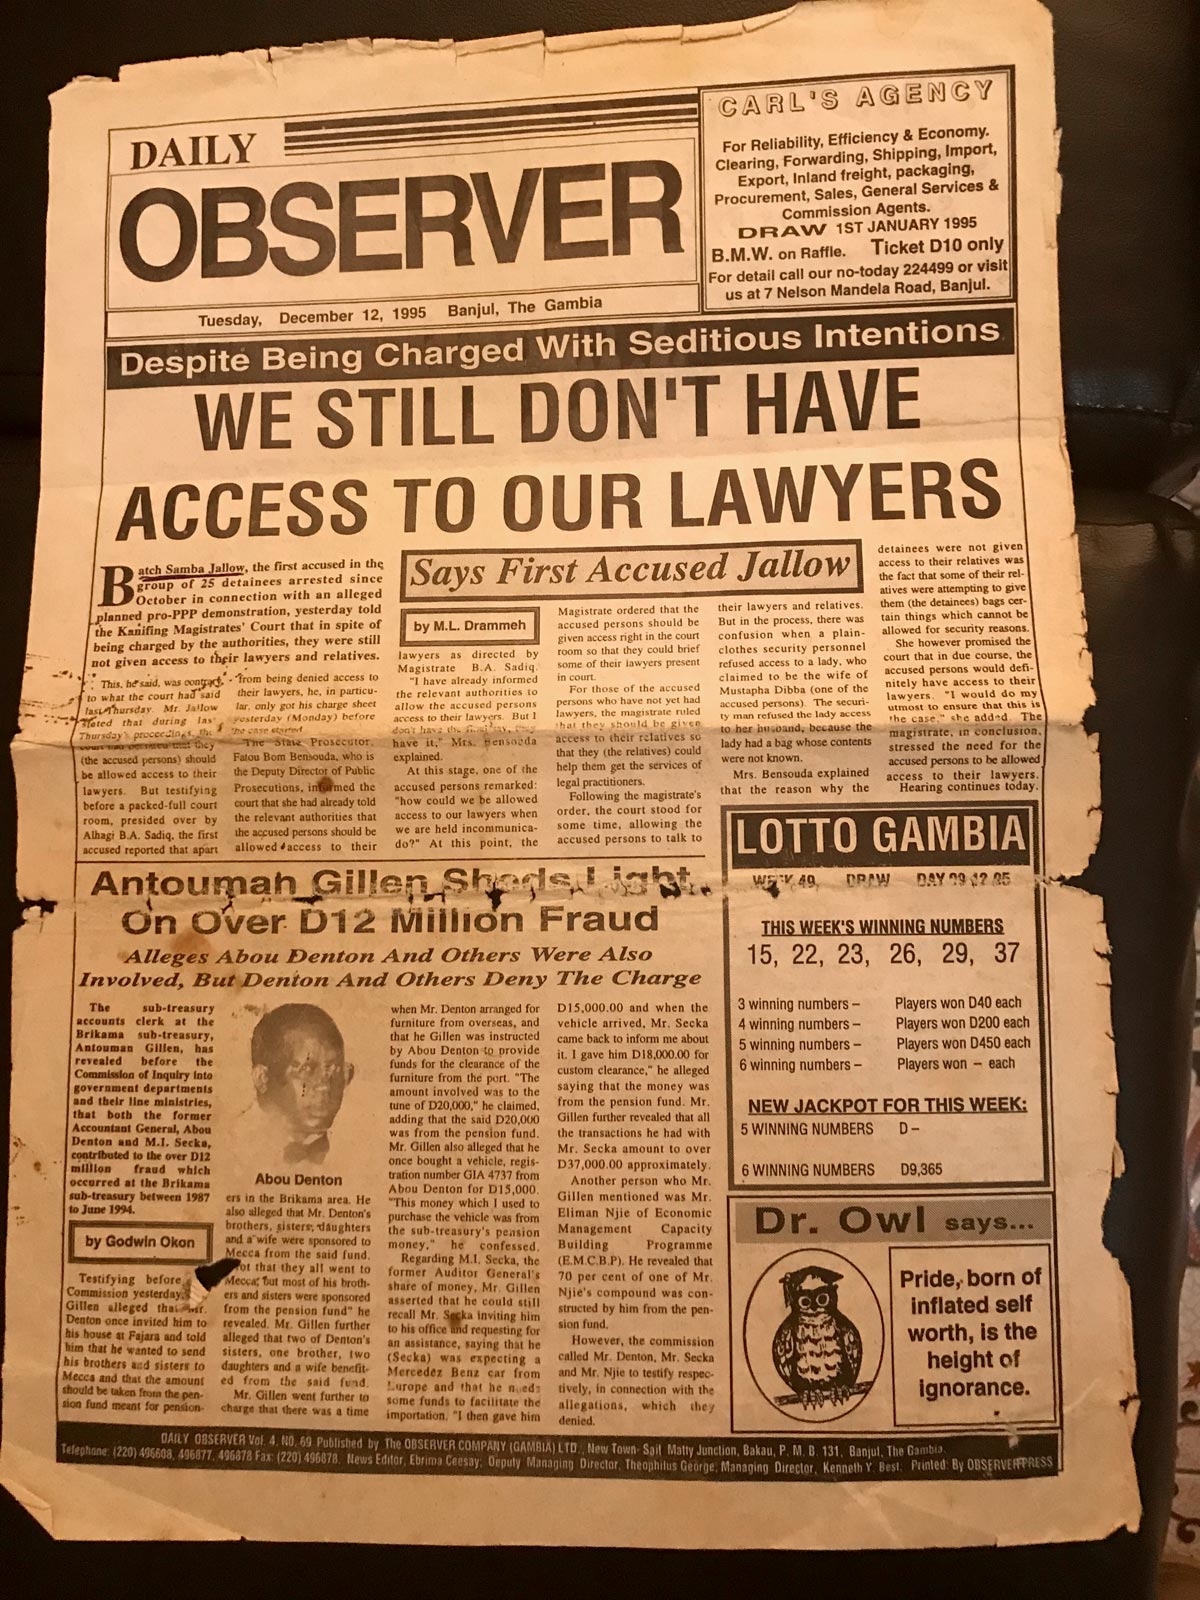 Photo from the Gambian newspaper The Observer, dated December 12, 1995, titling: We still do not have access to our lawyers